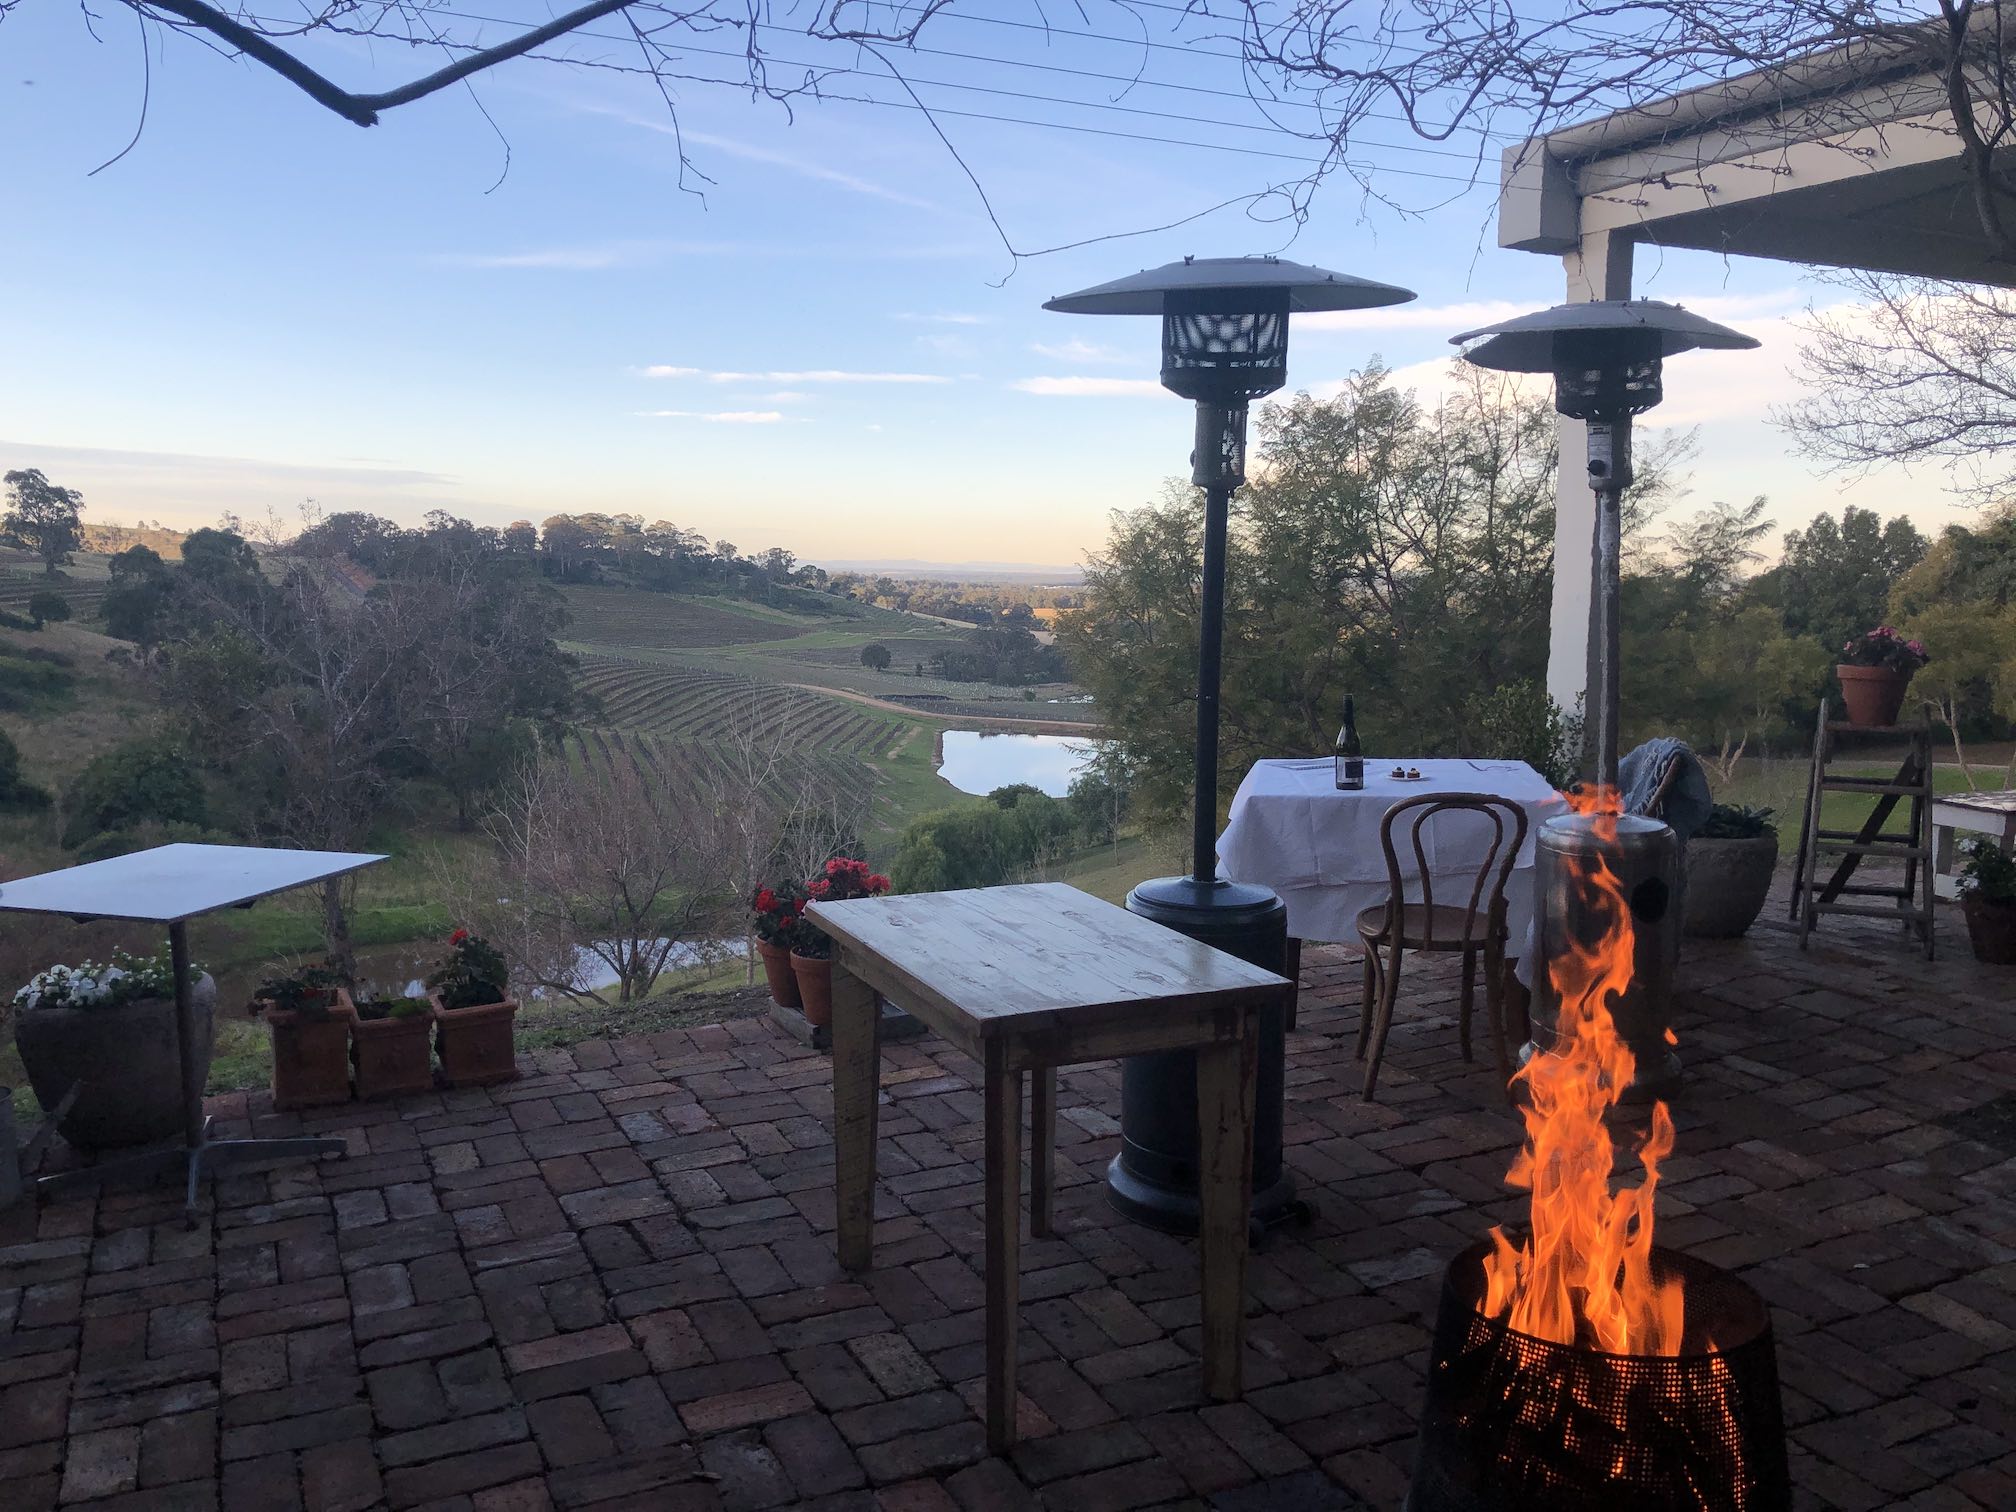 Open fire, looking out over vineyards in the valley below.